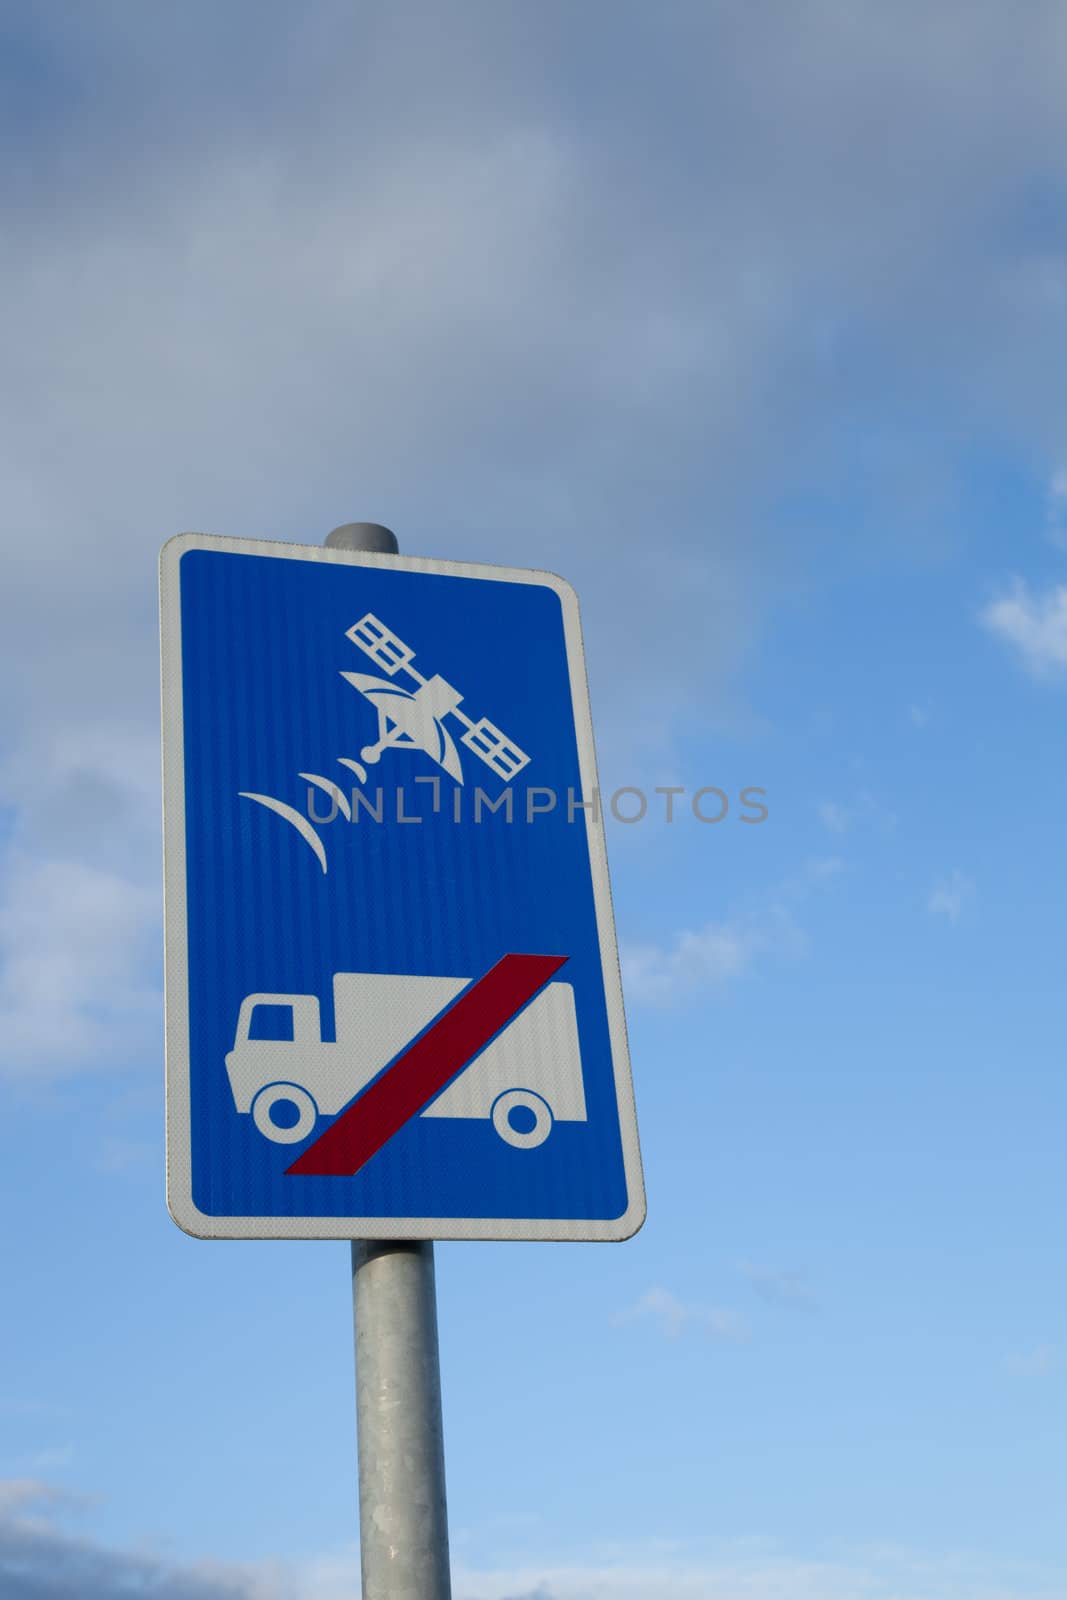 A sign with a lorry, truck, and red slash with a satellite tracking symbol above, on a blue background against a blue sky with cloud